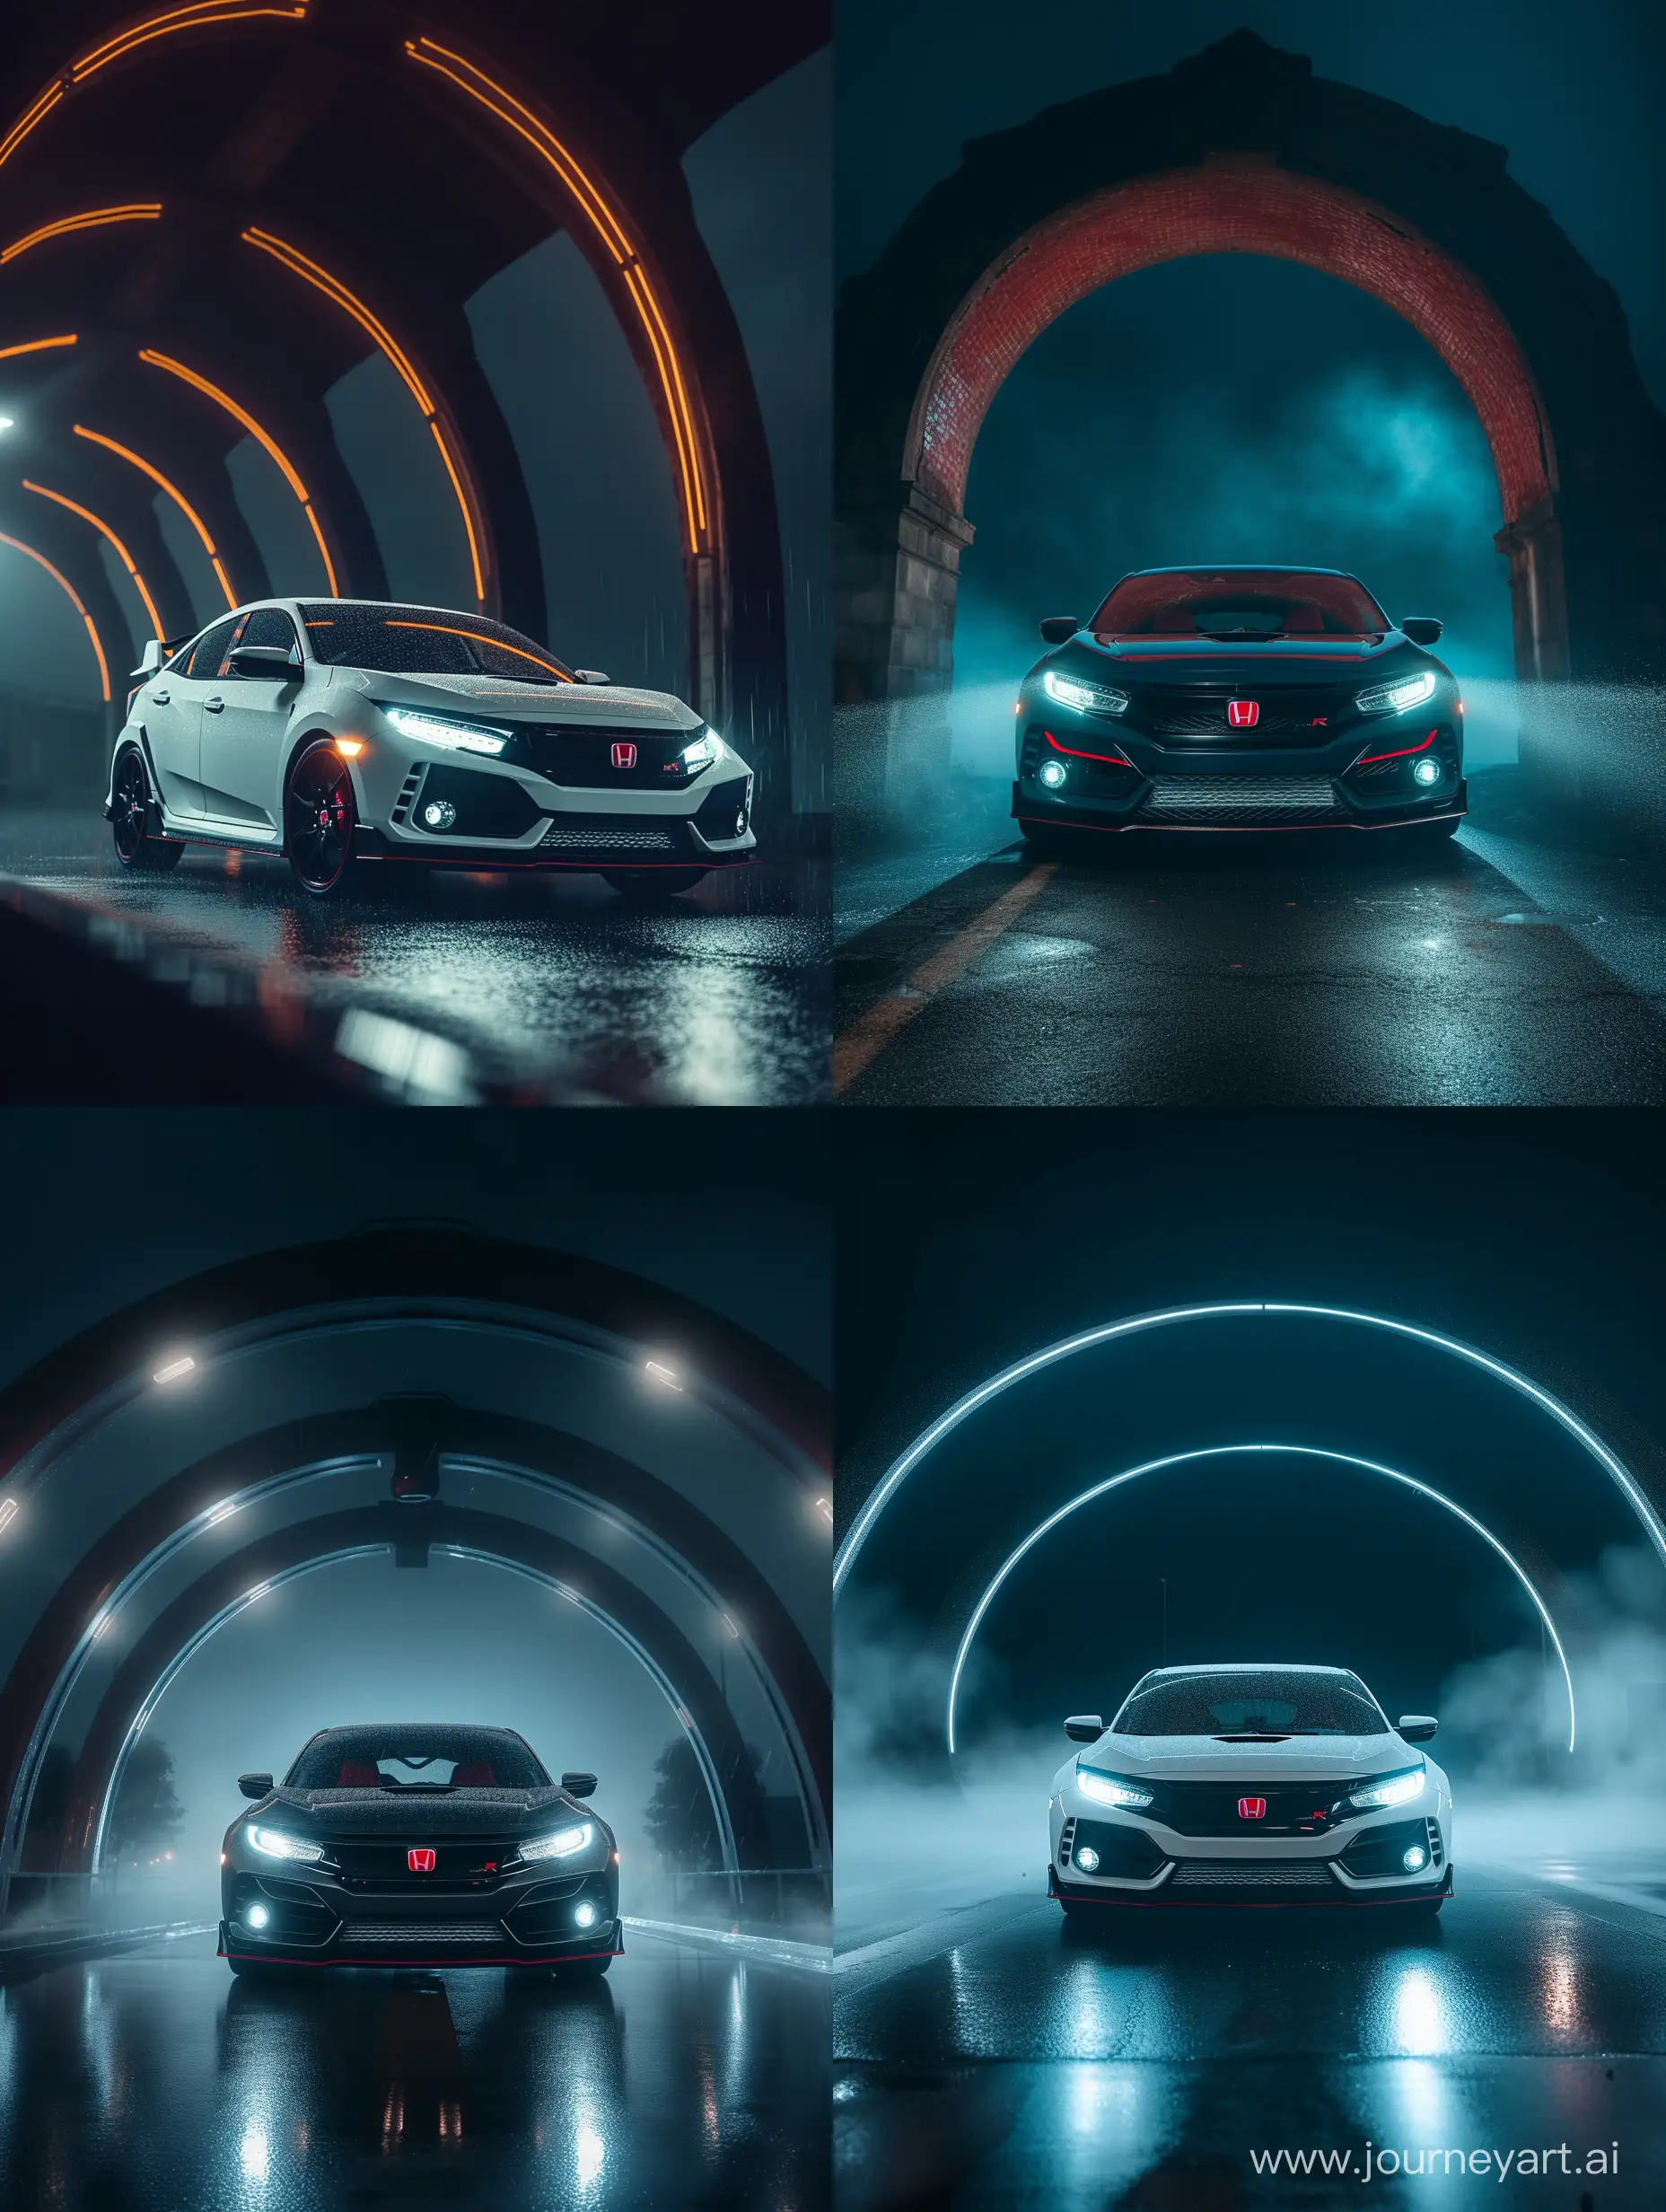 Honda civic type r 2019 stands at night in a dark arch, with headlights on, rainy weather, fog all around, cinematic aesthetics HD HQ 8K